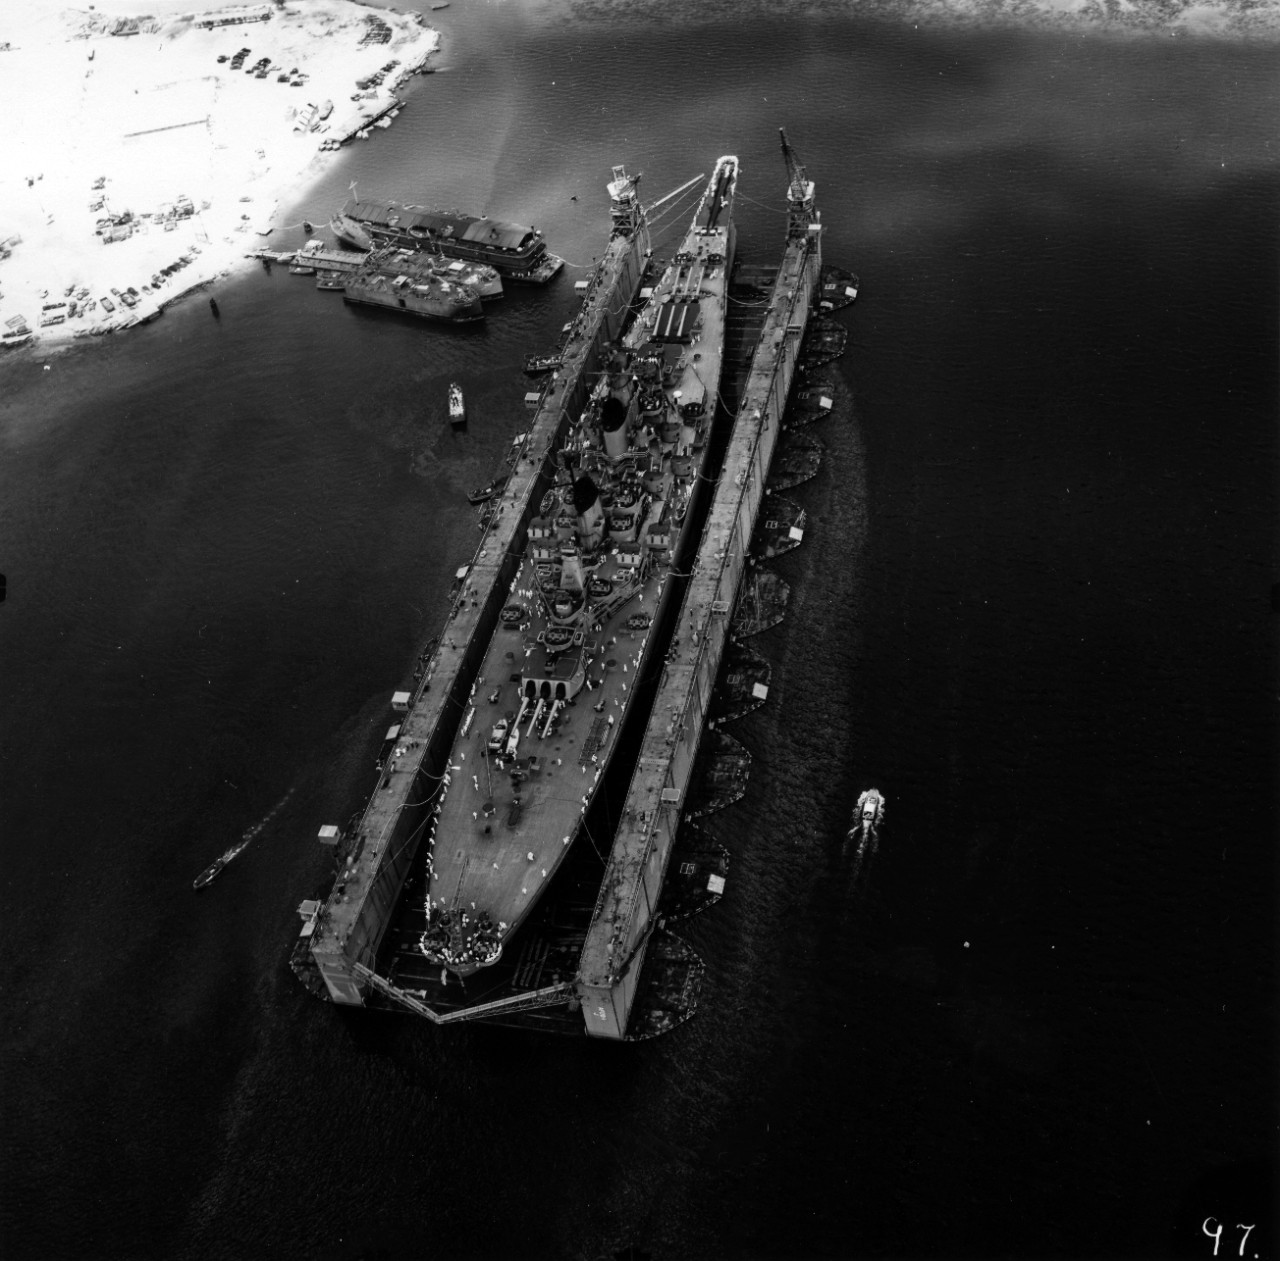 S-073 Captain Church Chappell Collection 143 photos of activities at Naval Operating Base Guam, 1951-1953. Sequence showing battleship USS Wisconsin (BB-64) entering Auxiliary Drydock AFDB-1, April 1952. Visit of Brazilian Naval Cadet Training Ship N.E. Almirante Saldanha to Guam, October 1952. Social functions and parties on Guam, 1952.